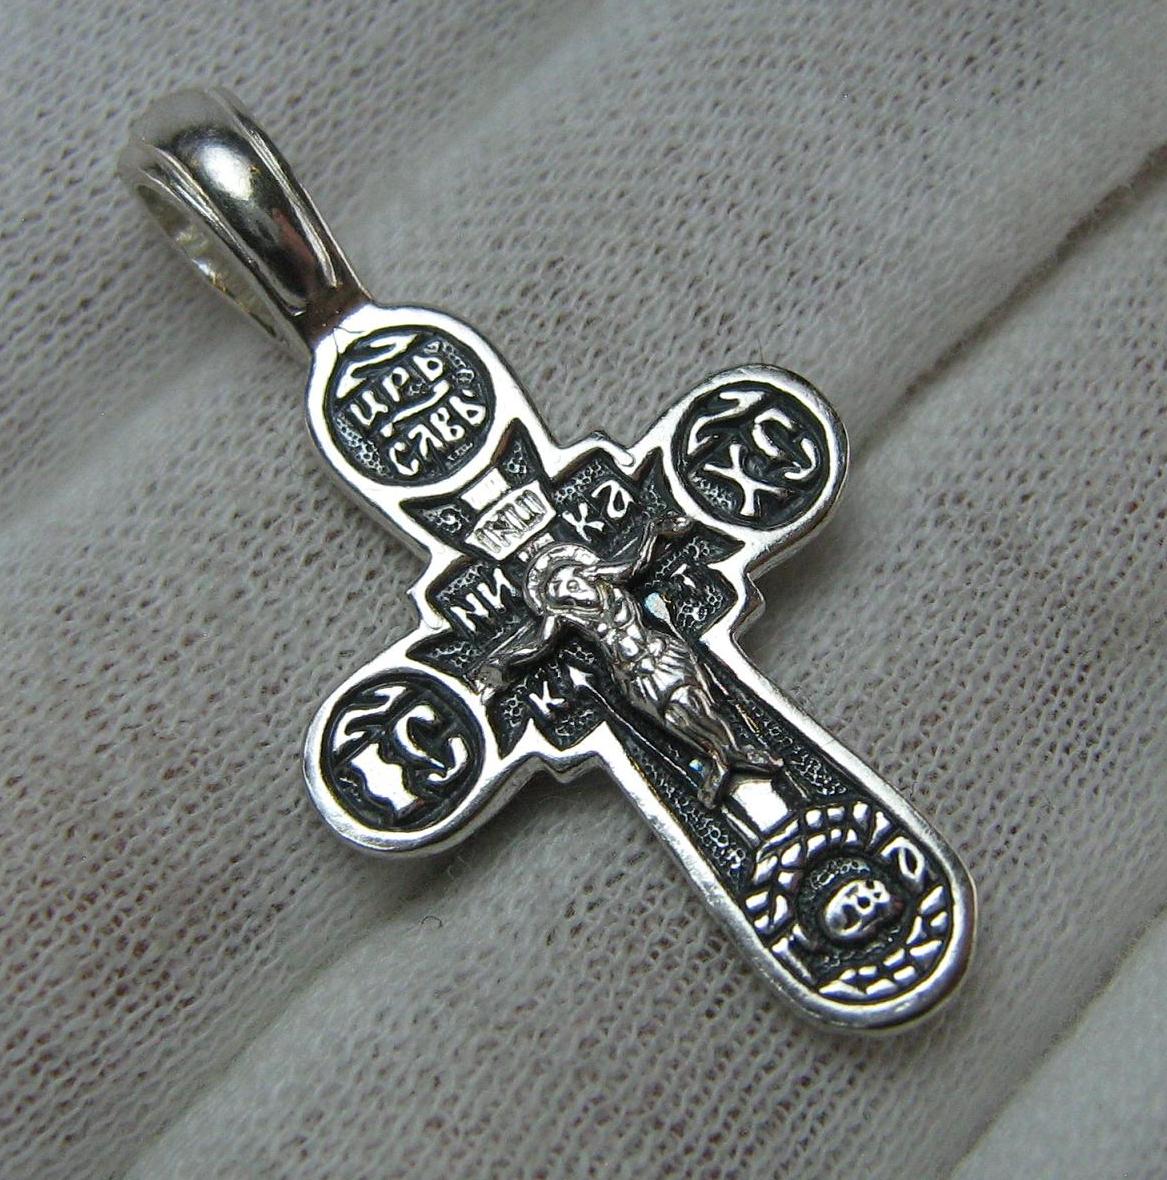 New solid 925 Sterling Silver oxidized cross pendant and crucifix with Christian prayer inscription to Jesus Christ decorated with ribbon oxidized pattern and Celtic knot